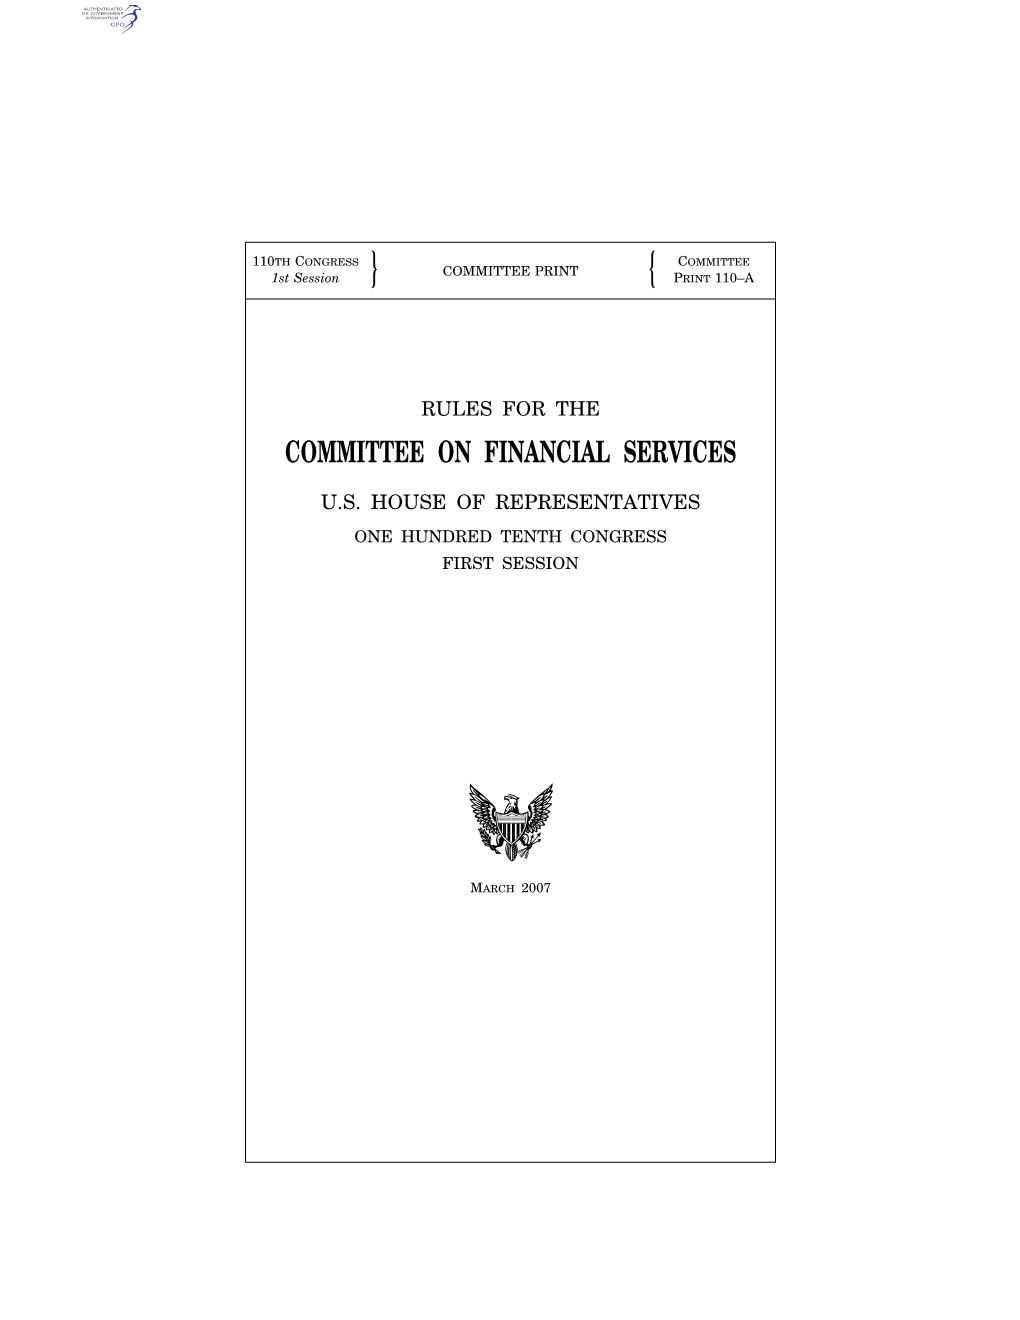 Committee on Financial Services